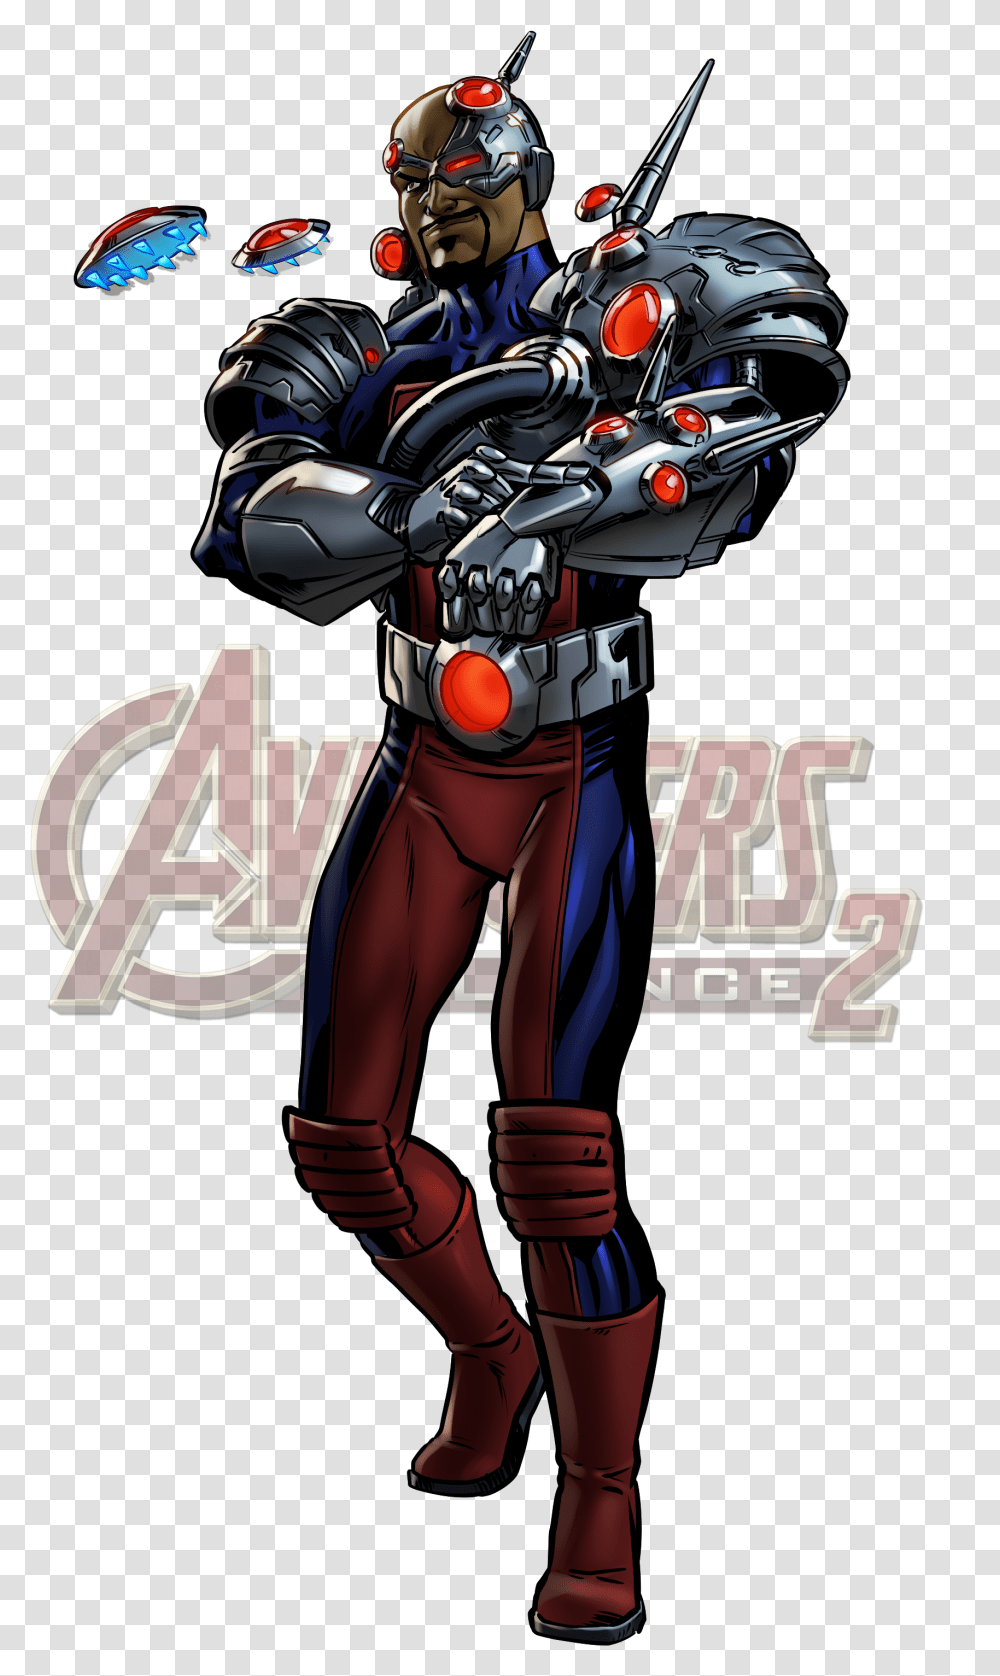 Avengers Alliance 2 Wikia Marvel Avengers Alliance 2 Characters, Helmet, Apparel, Person Transparent Png